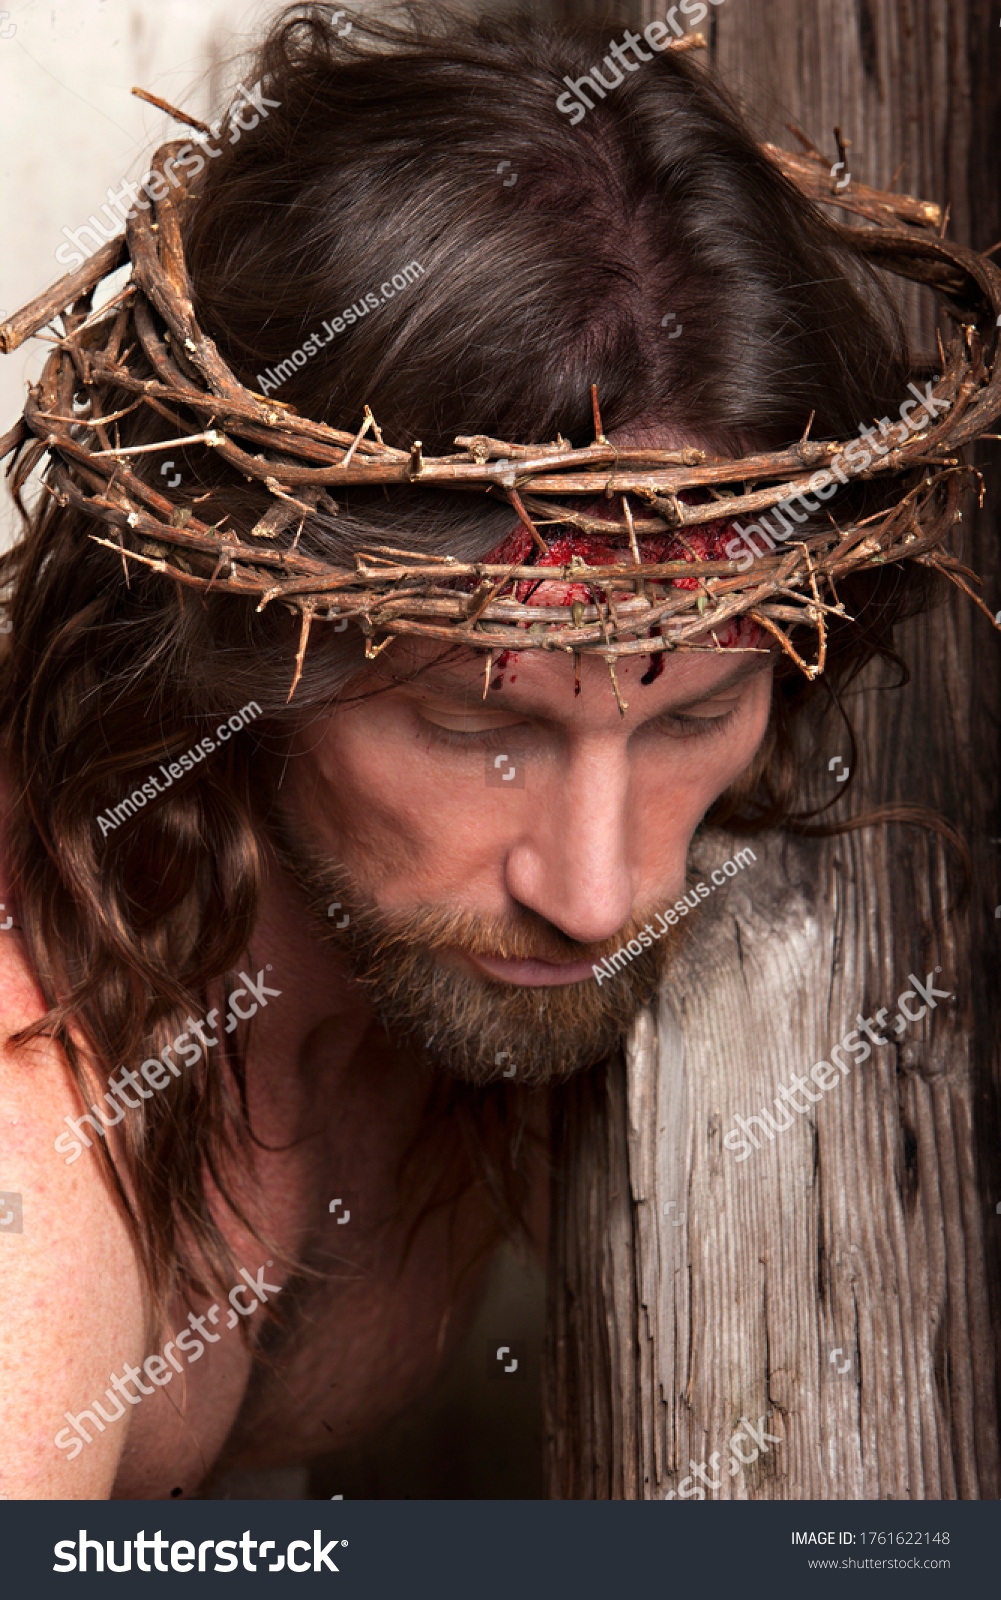 Jesus Christ Wearing Crown Thorns Carrying Stock Photo 1761622148